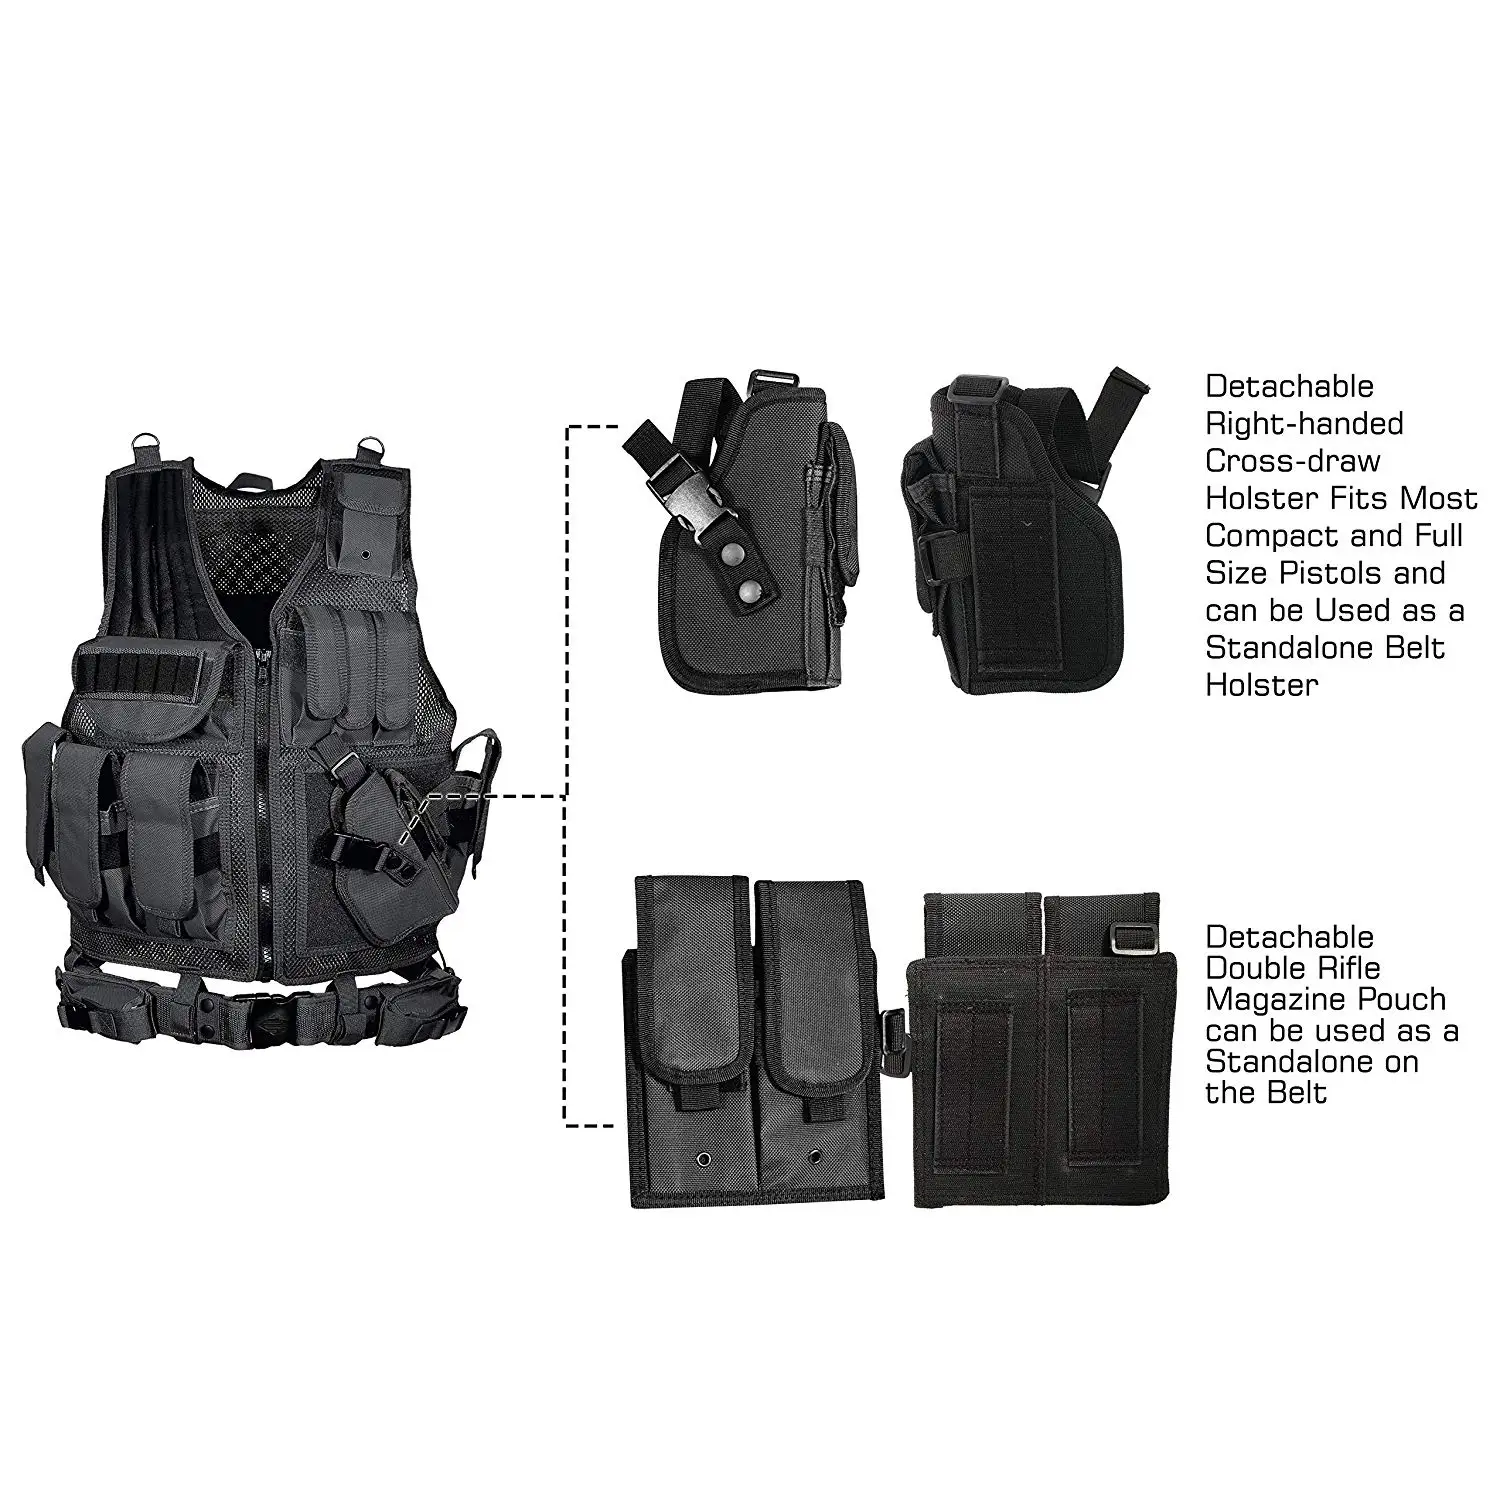 Wholesale Tactico Security Molle Tactical Safety Vest Black